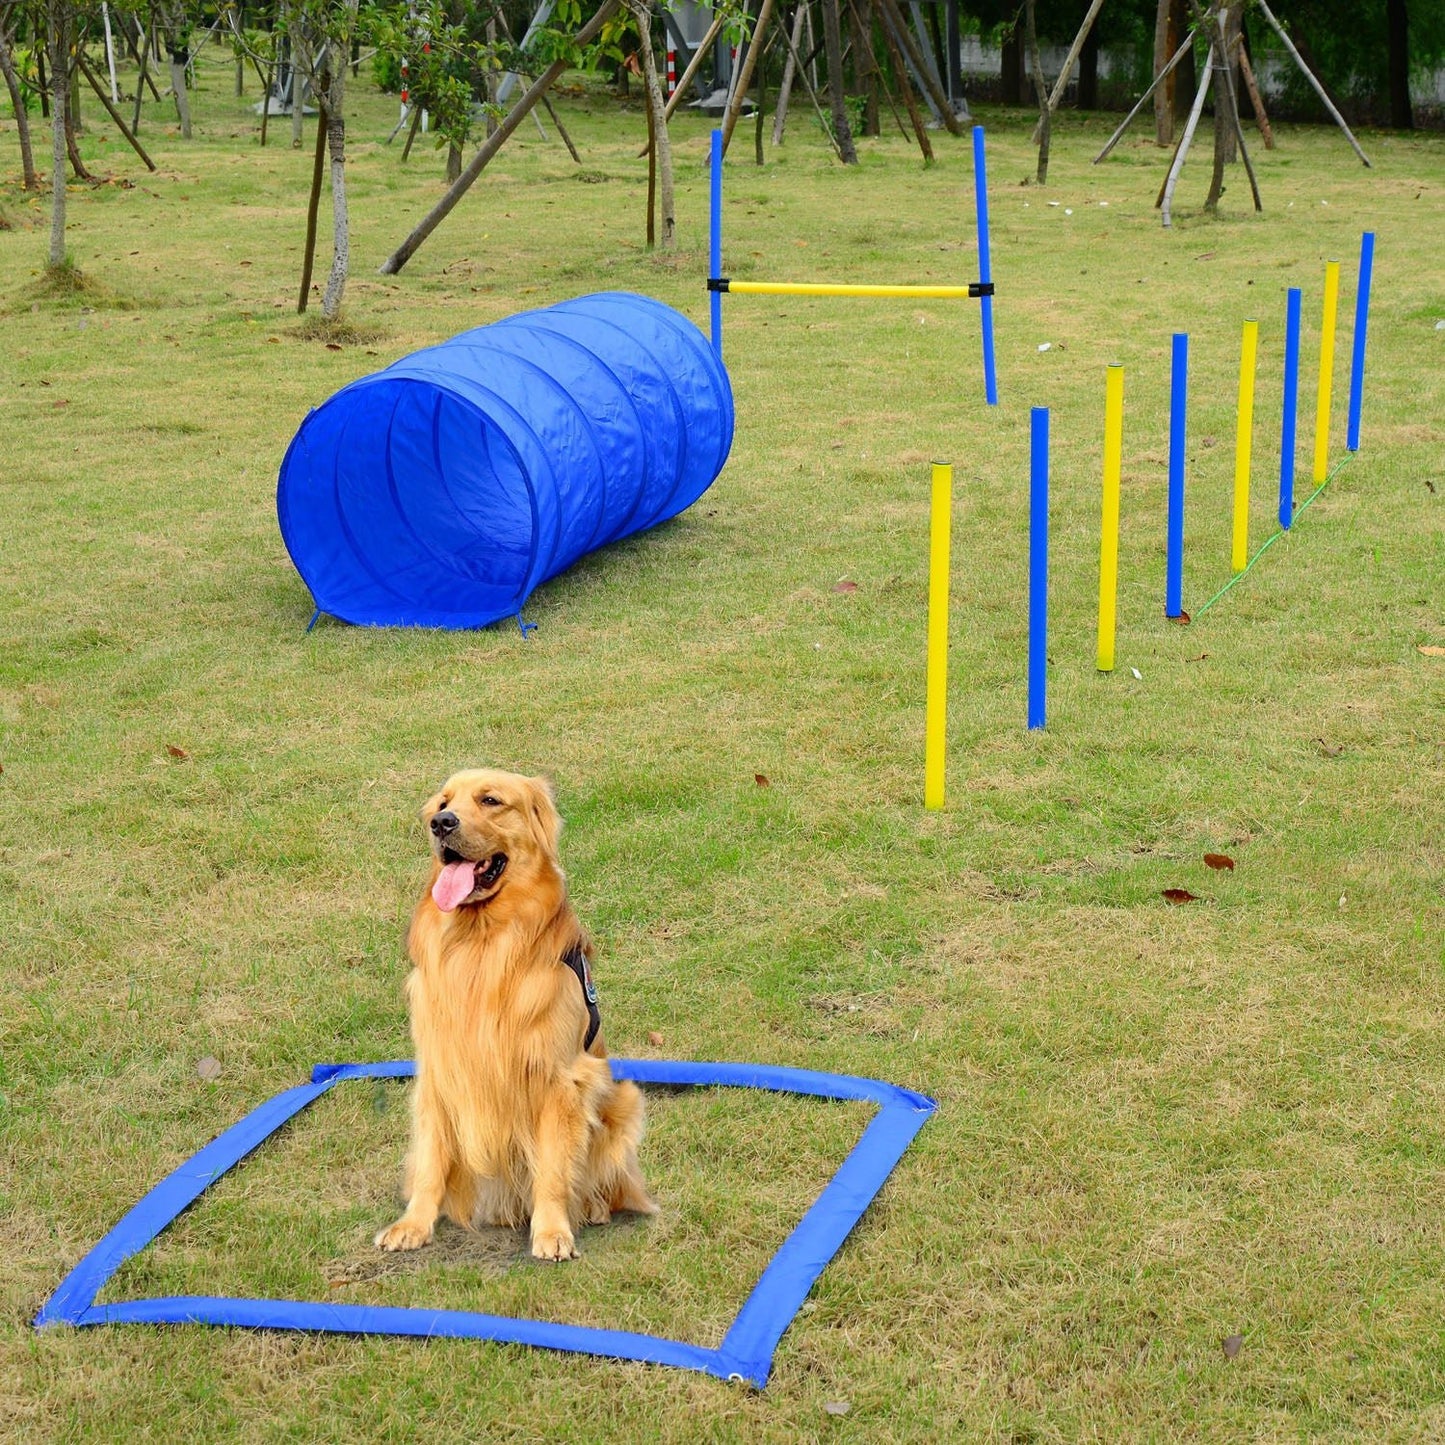 -PawHut 4pc Obstacle Dog Agility Training Course Kit for the Backyard with Slalom Poles Tunnel Jumps & Stop Box - Outdoor Style Company